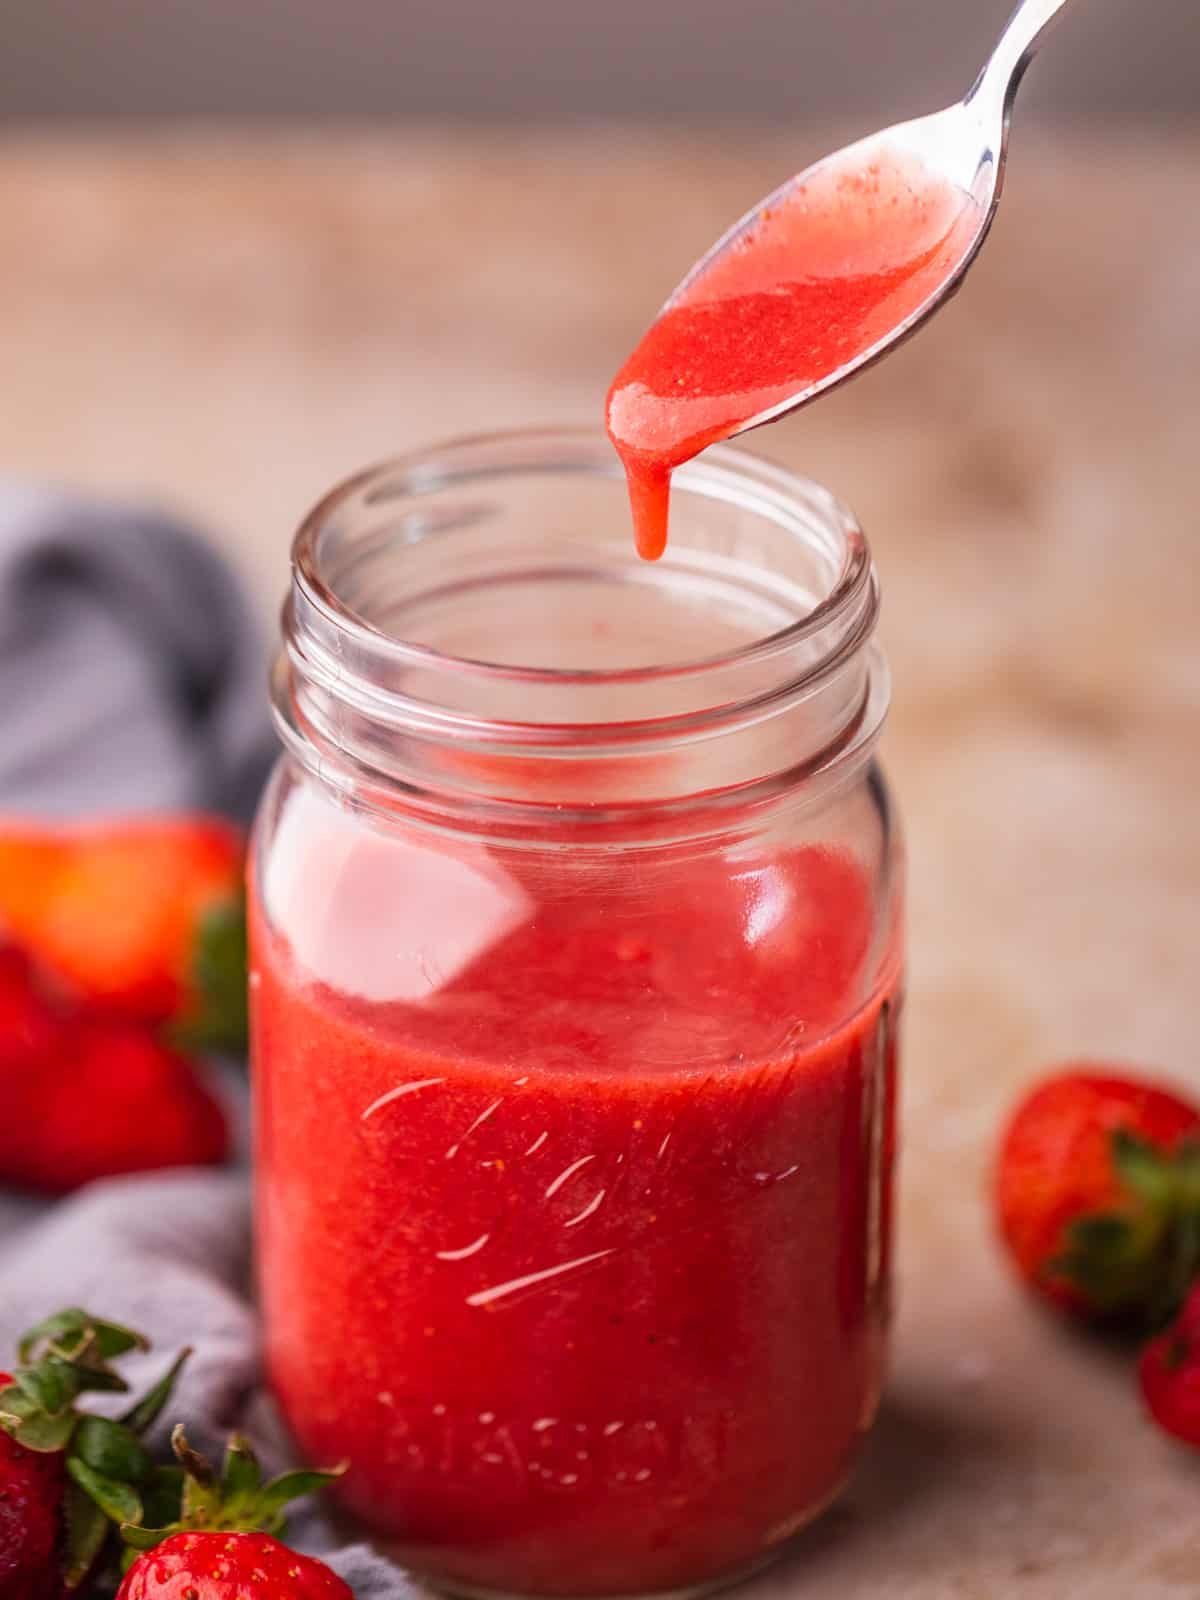 strawberry puree dripping off a spoon into a mason jar of puree with fresh strawberries around.